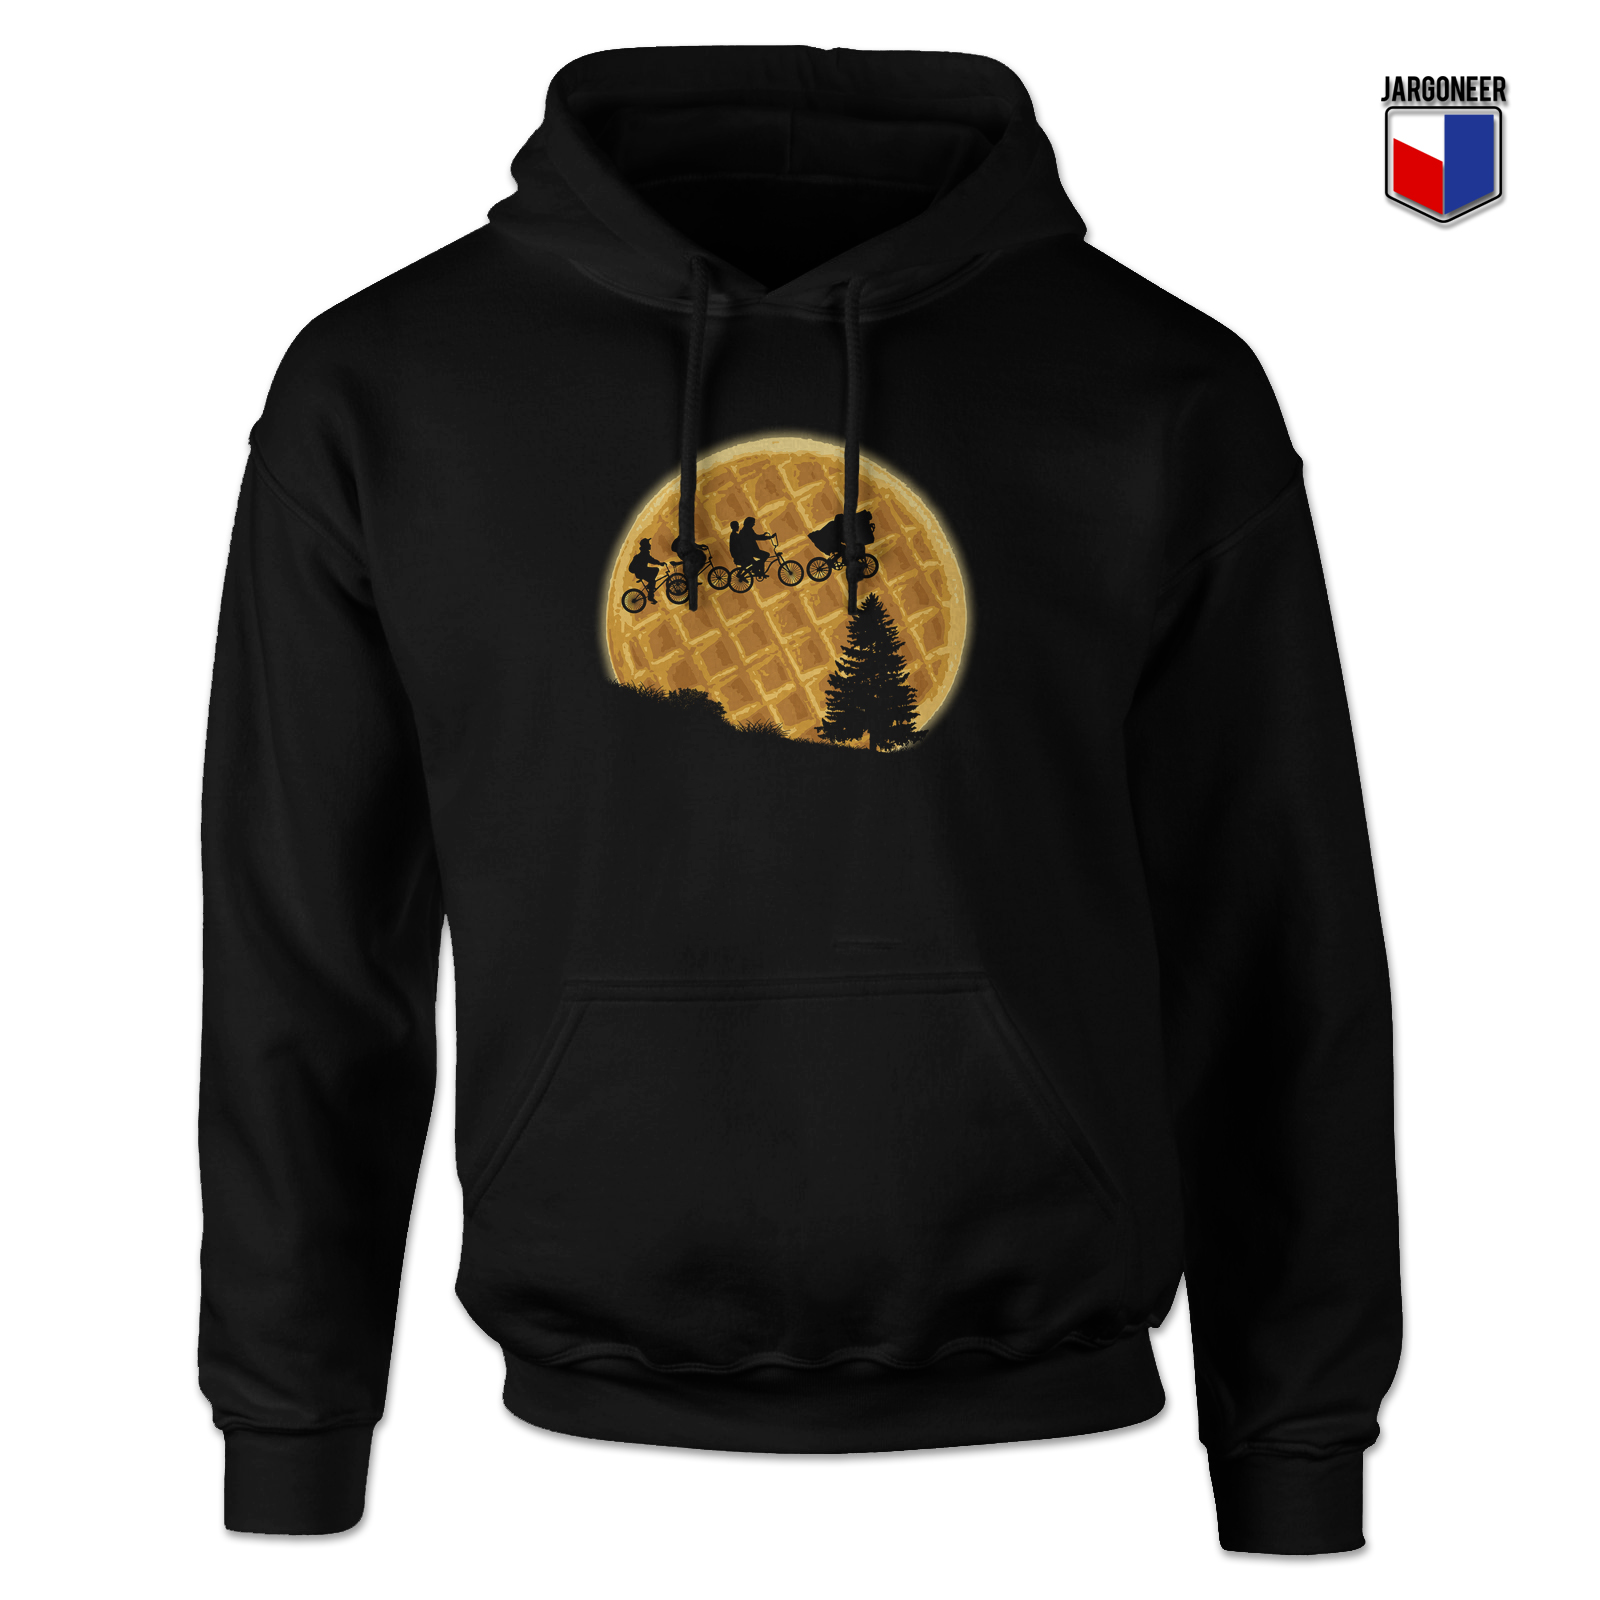 Stranger Things Waffle Moon Hoodie - Shop Unique Graphic Cool Shirt Designs